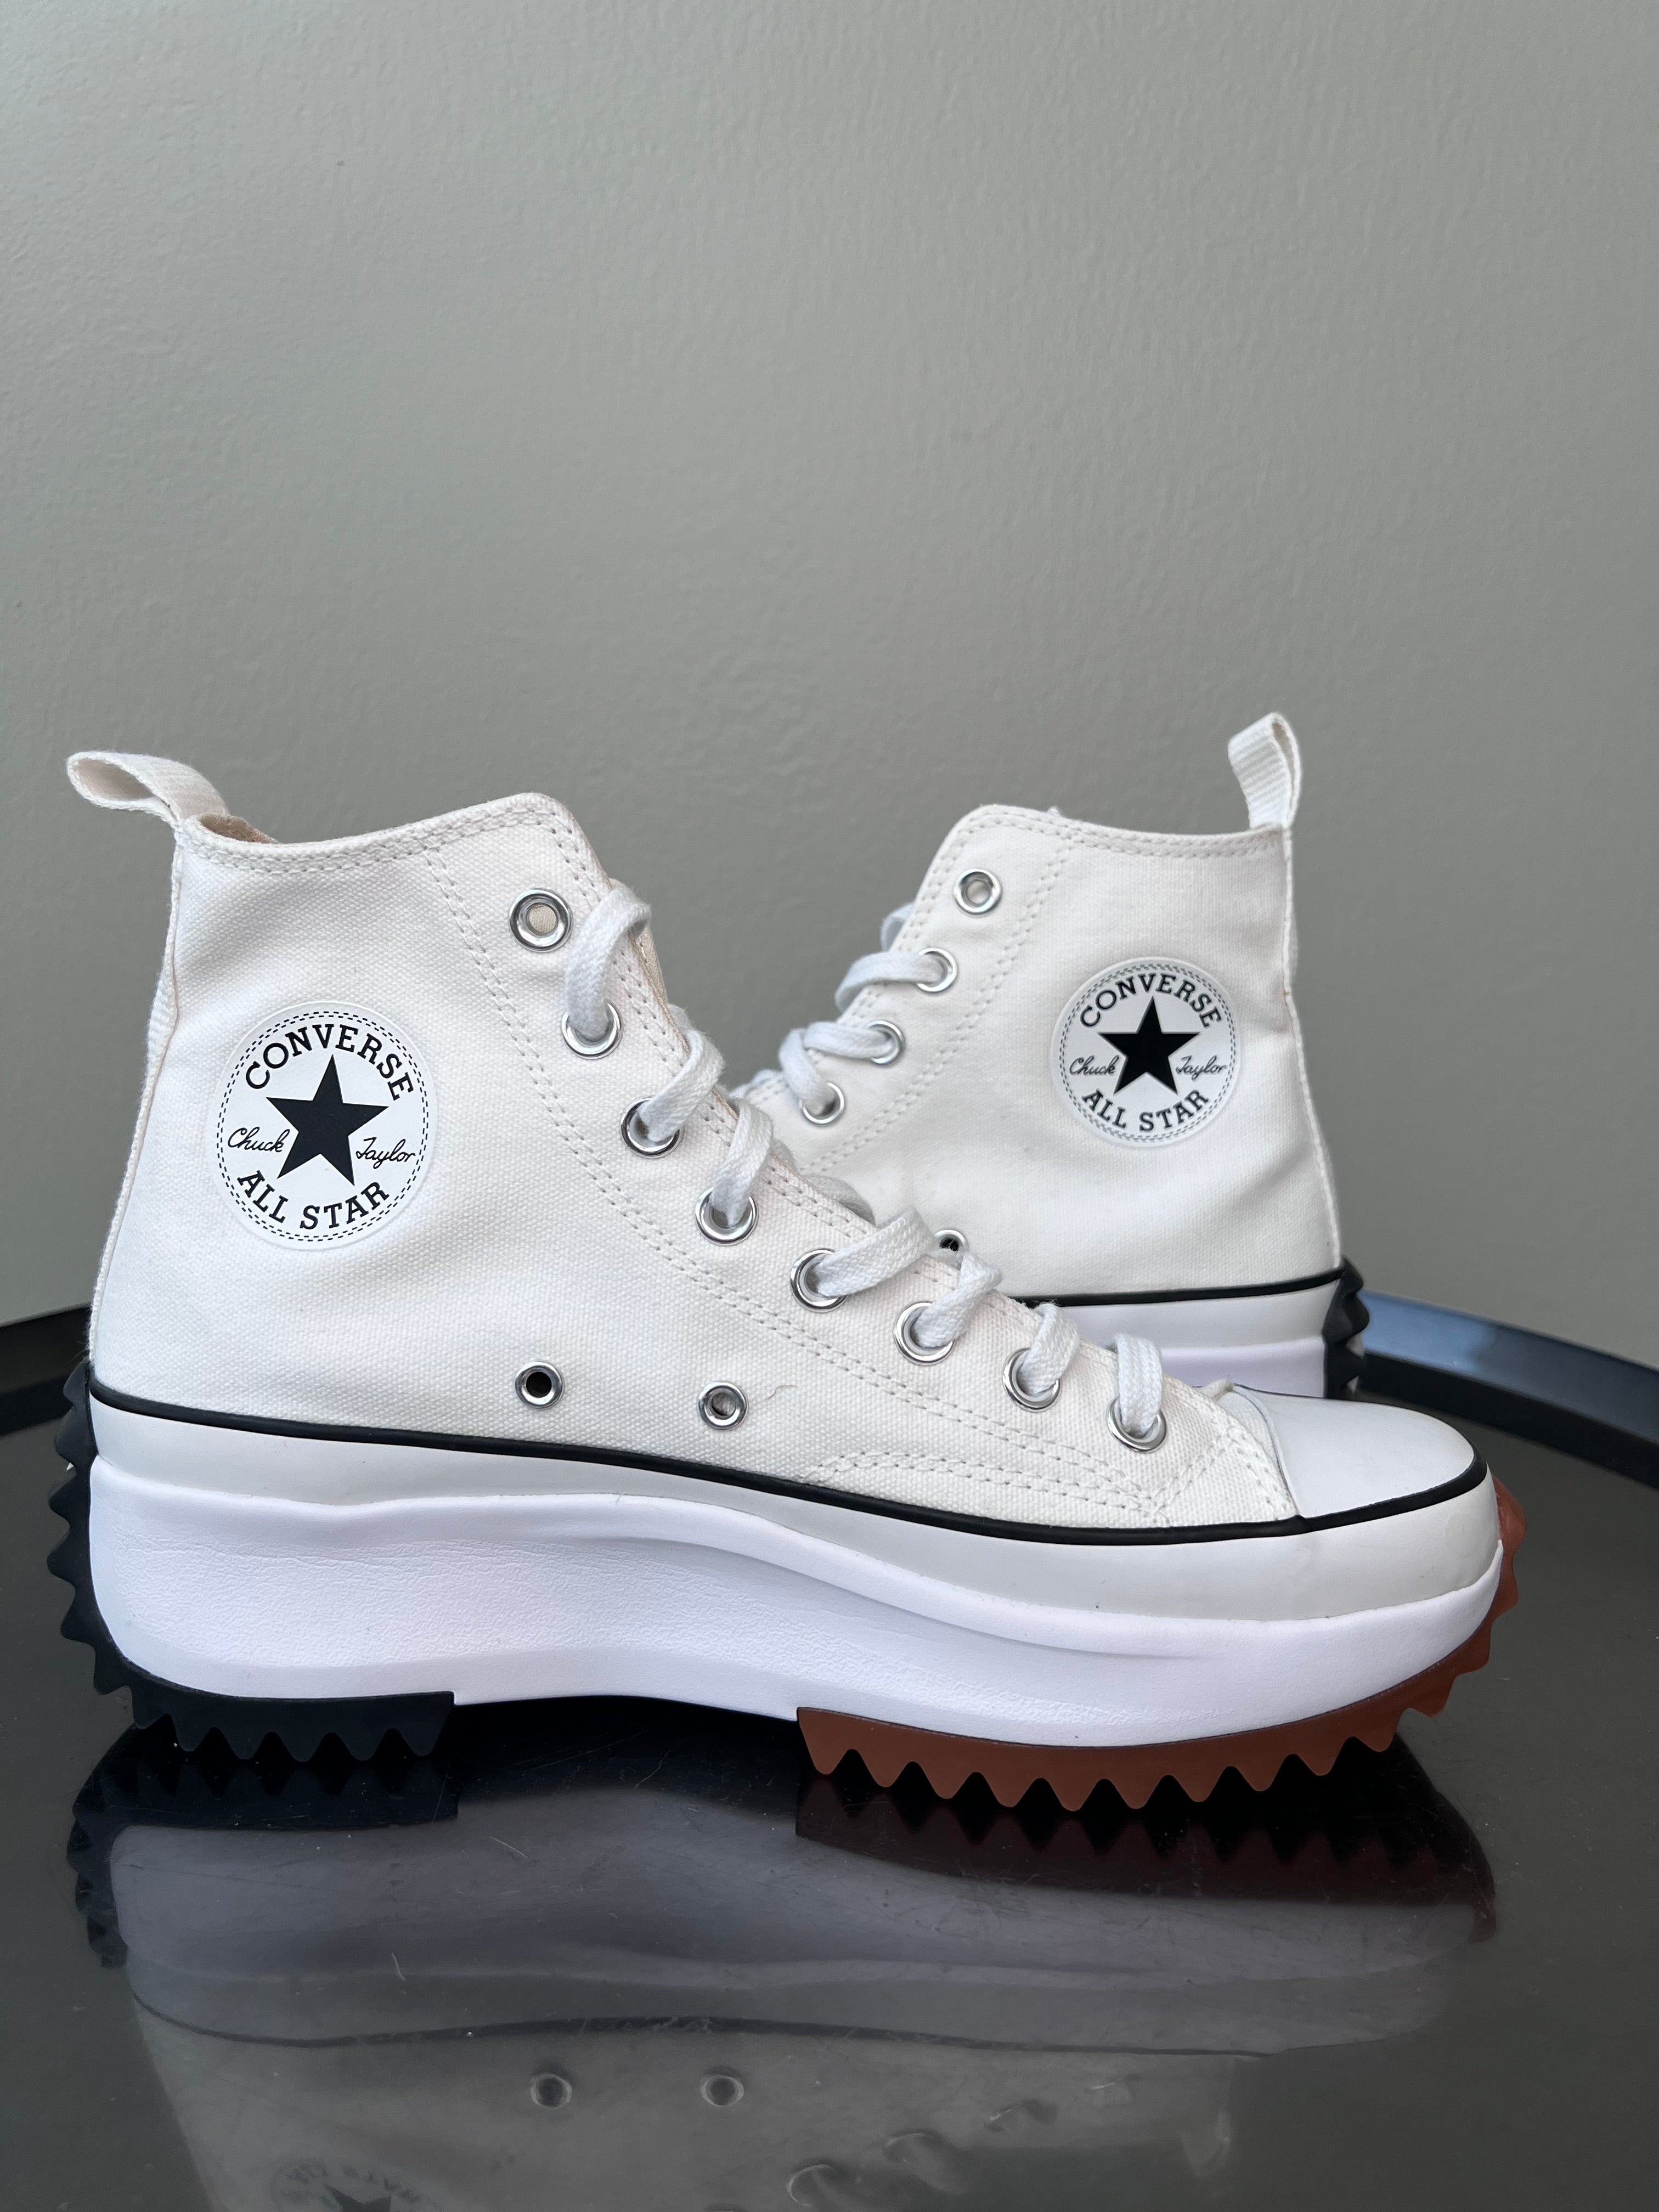 White sneakers with black & brown platform - CONVERSE